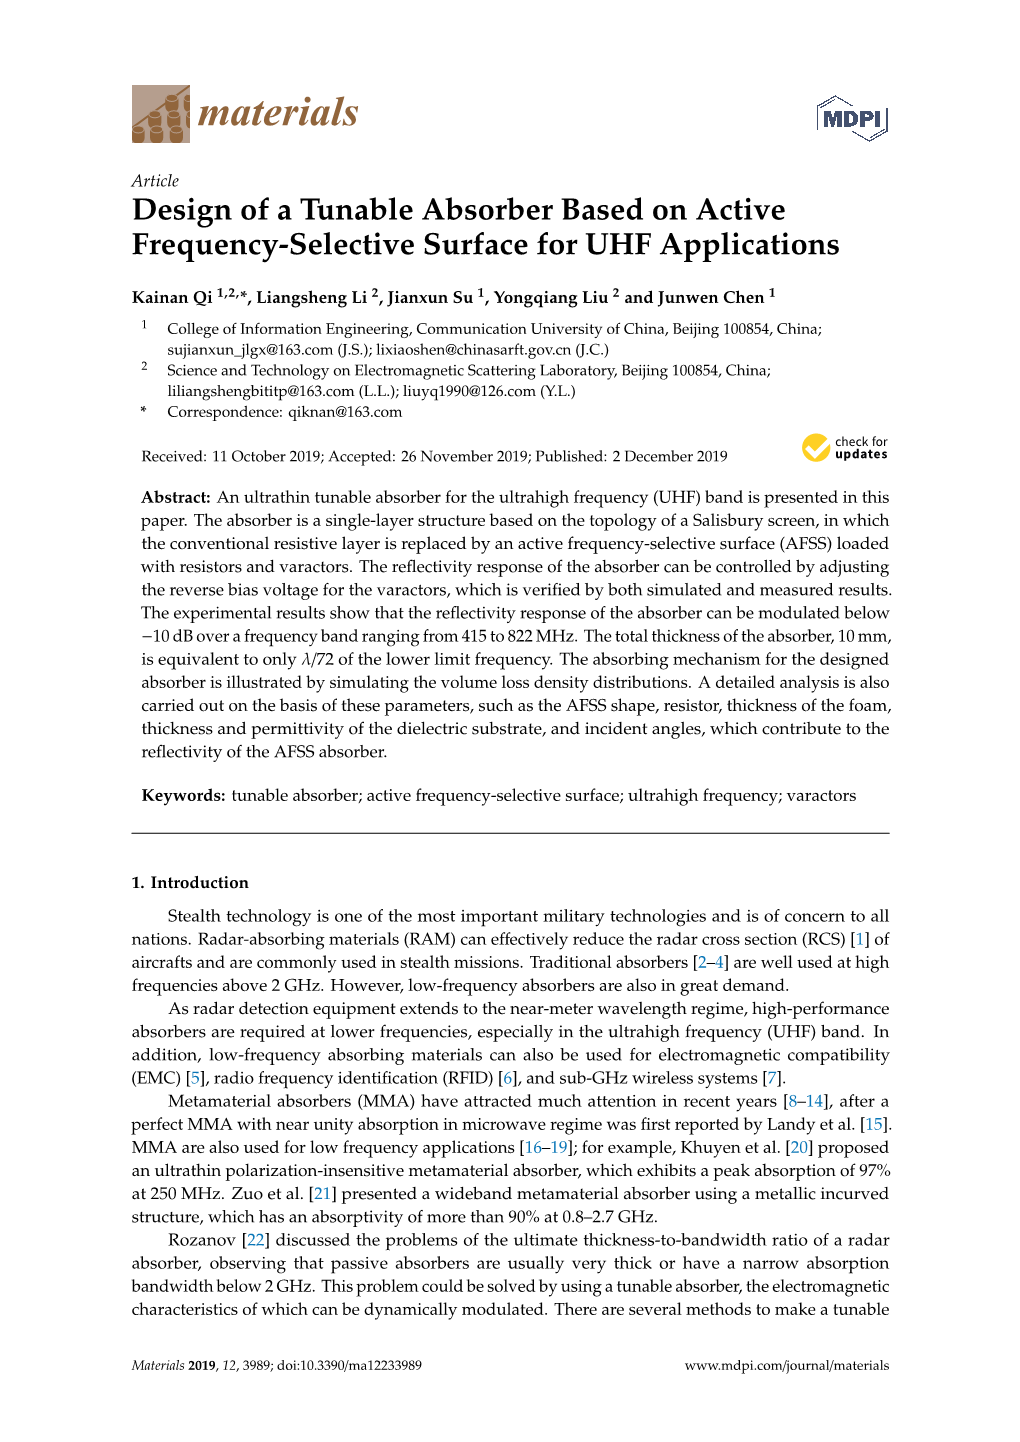 Design of a Tunable Absorber Based on Active Frequency-Selective Surface for UHF Applications